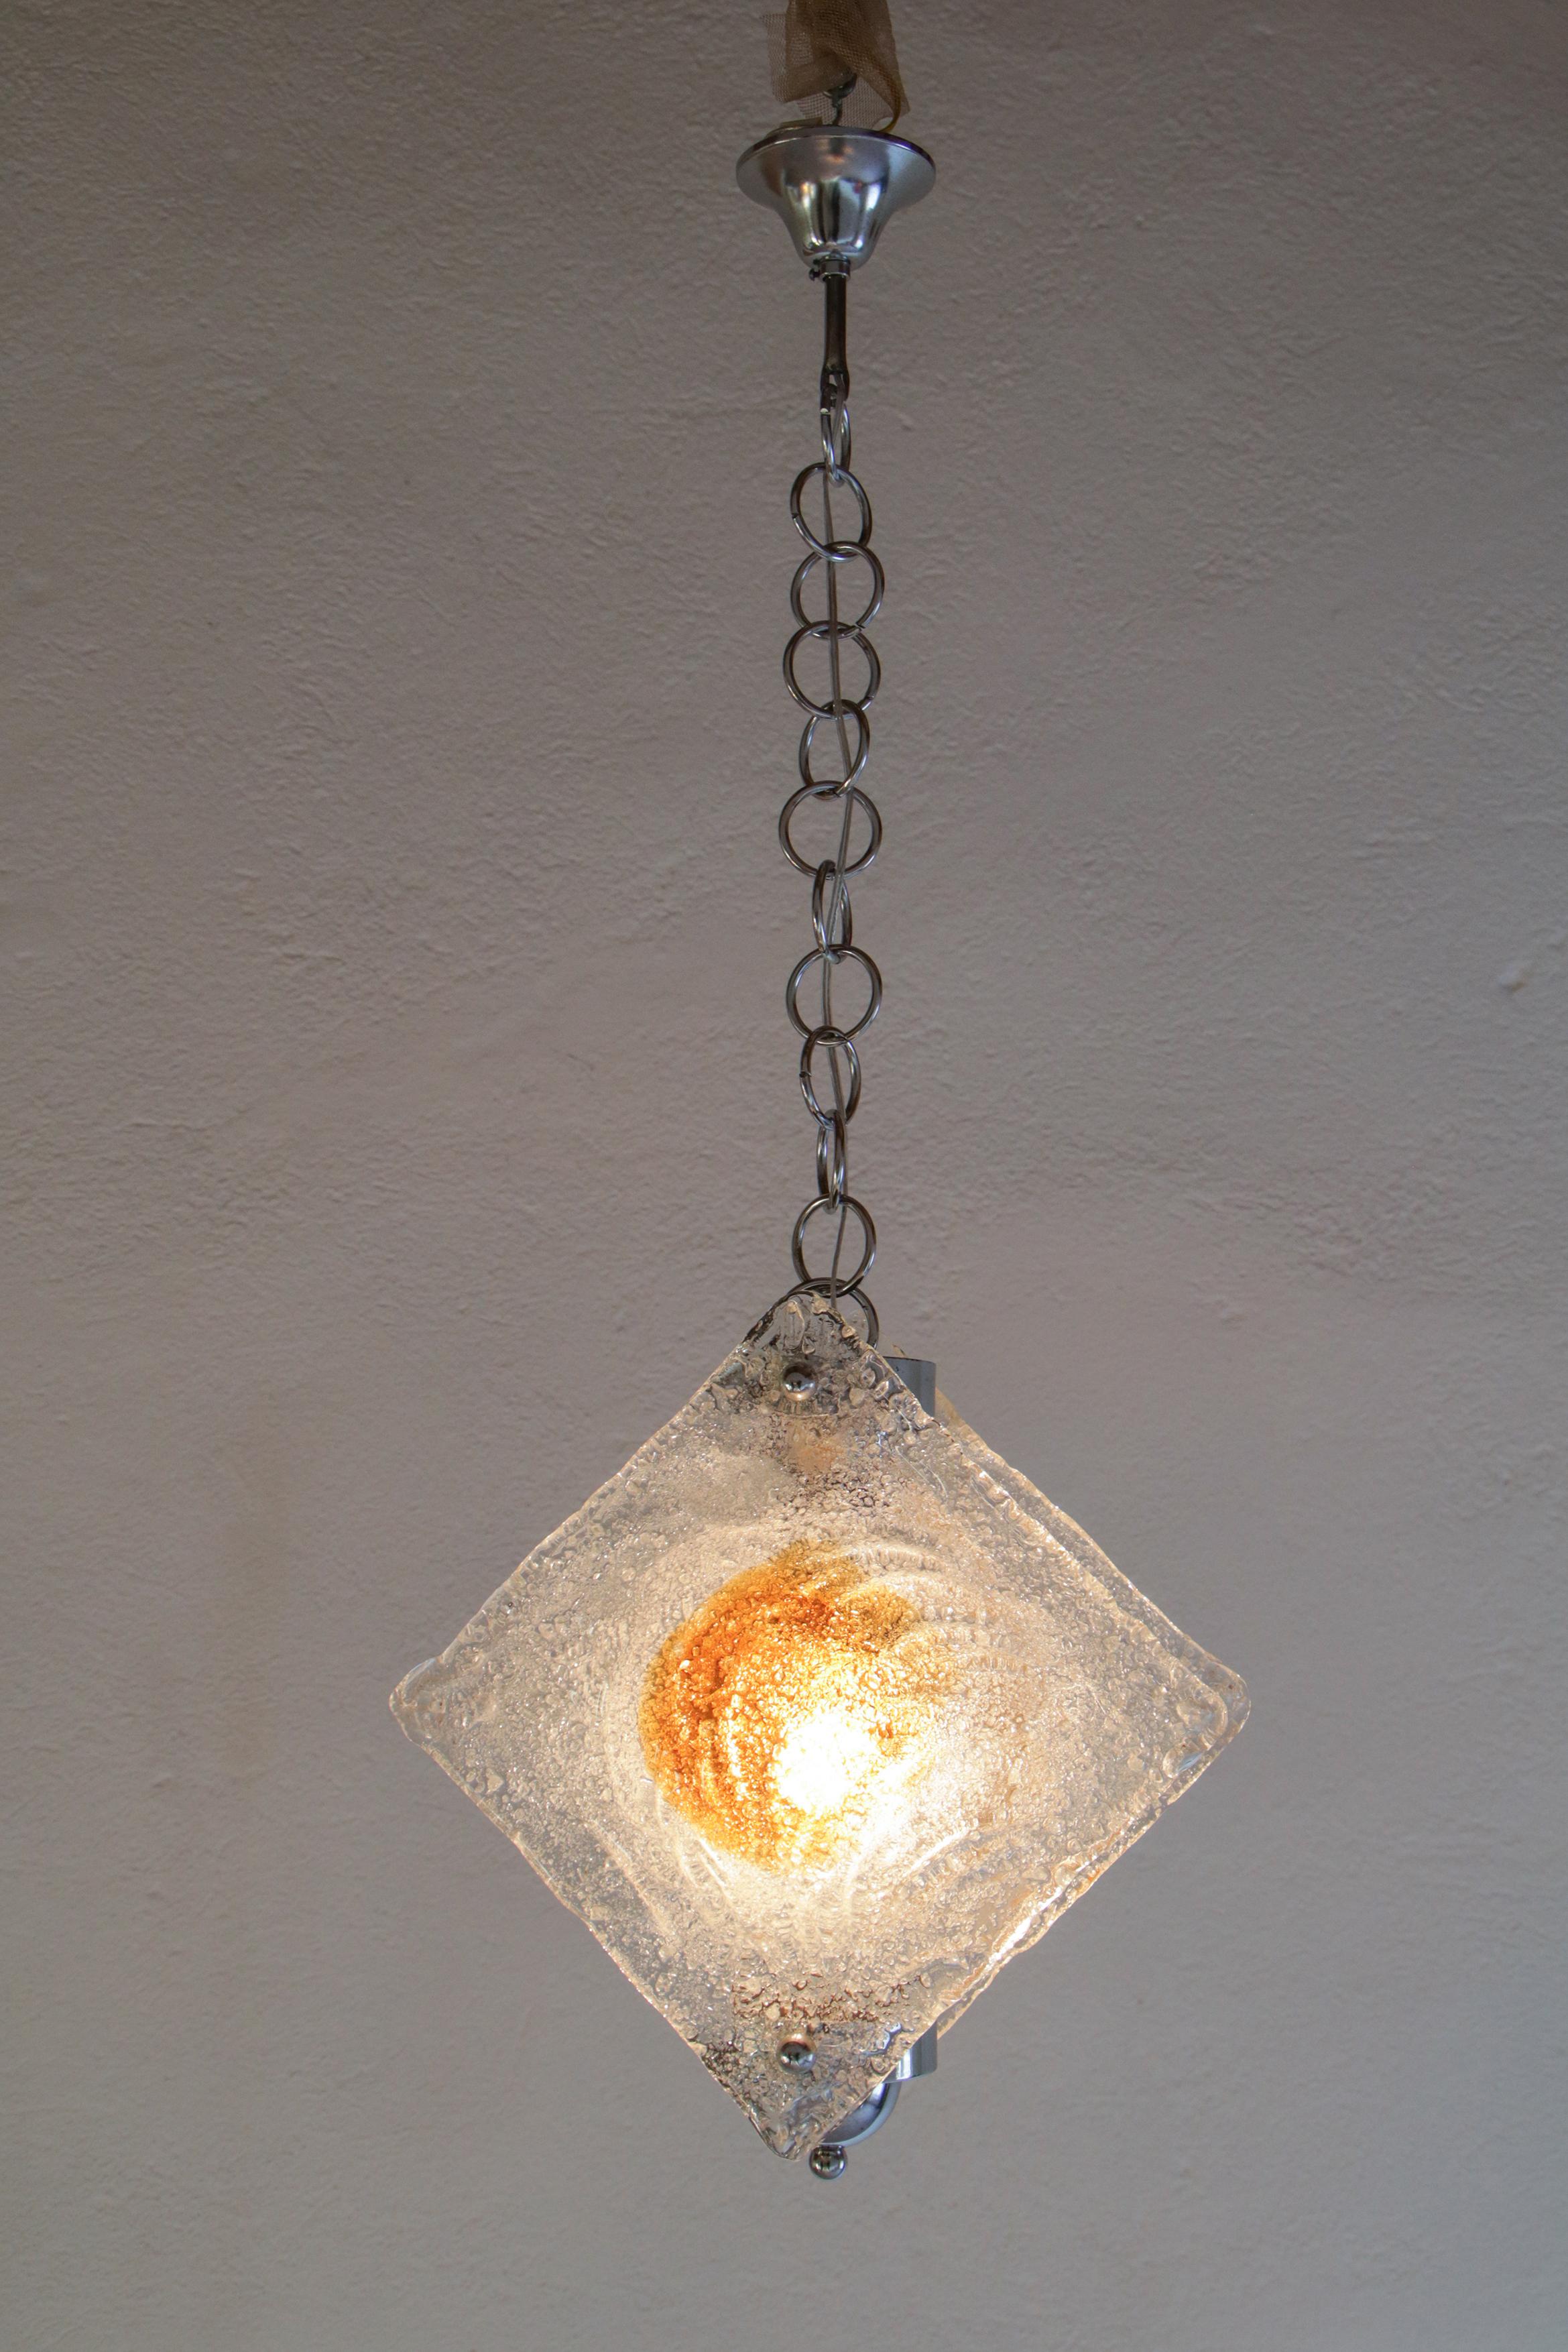 Charming Italian mid-century Murano glass pendant or hanging lamp per Mazzega fashion house, from the 1970s. Blown Murano glass in amber clear color with chromium steel structure. The restoration of this mid-century pendant lamp was made with great